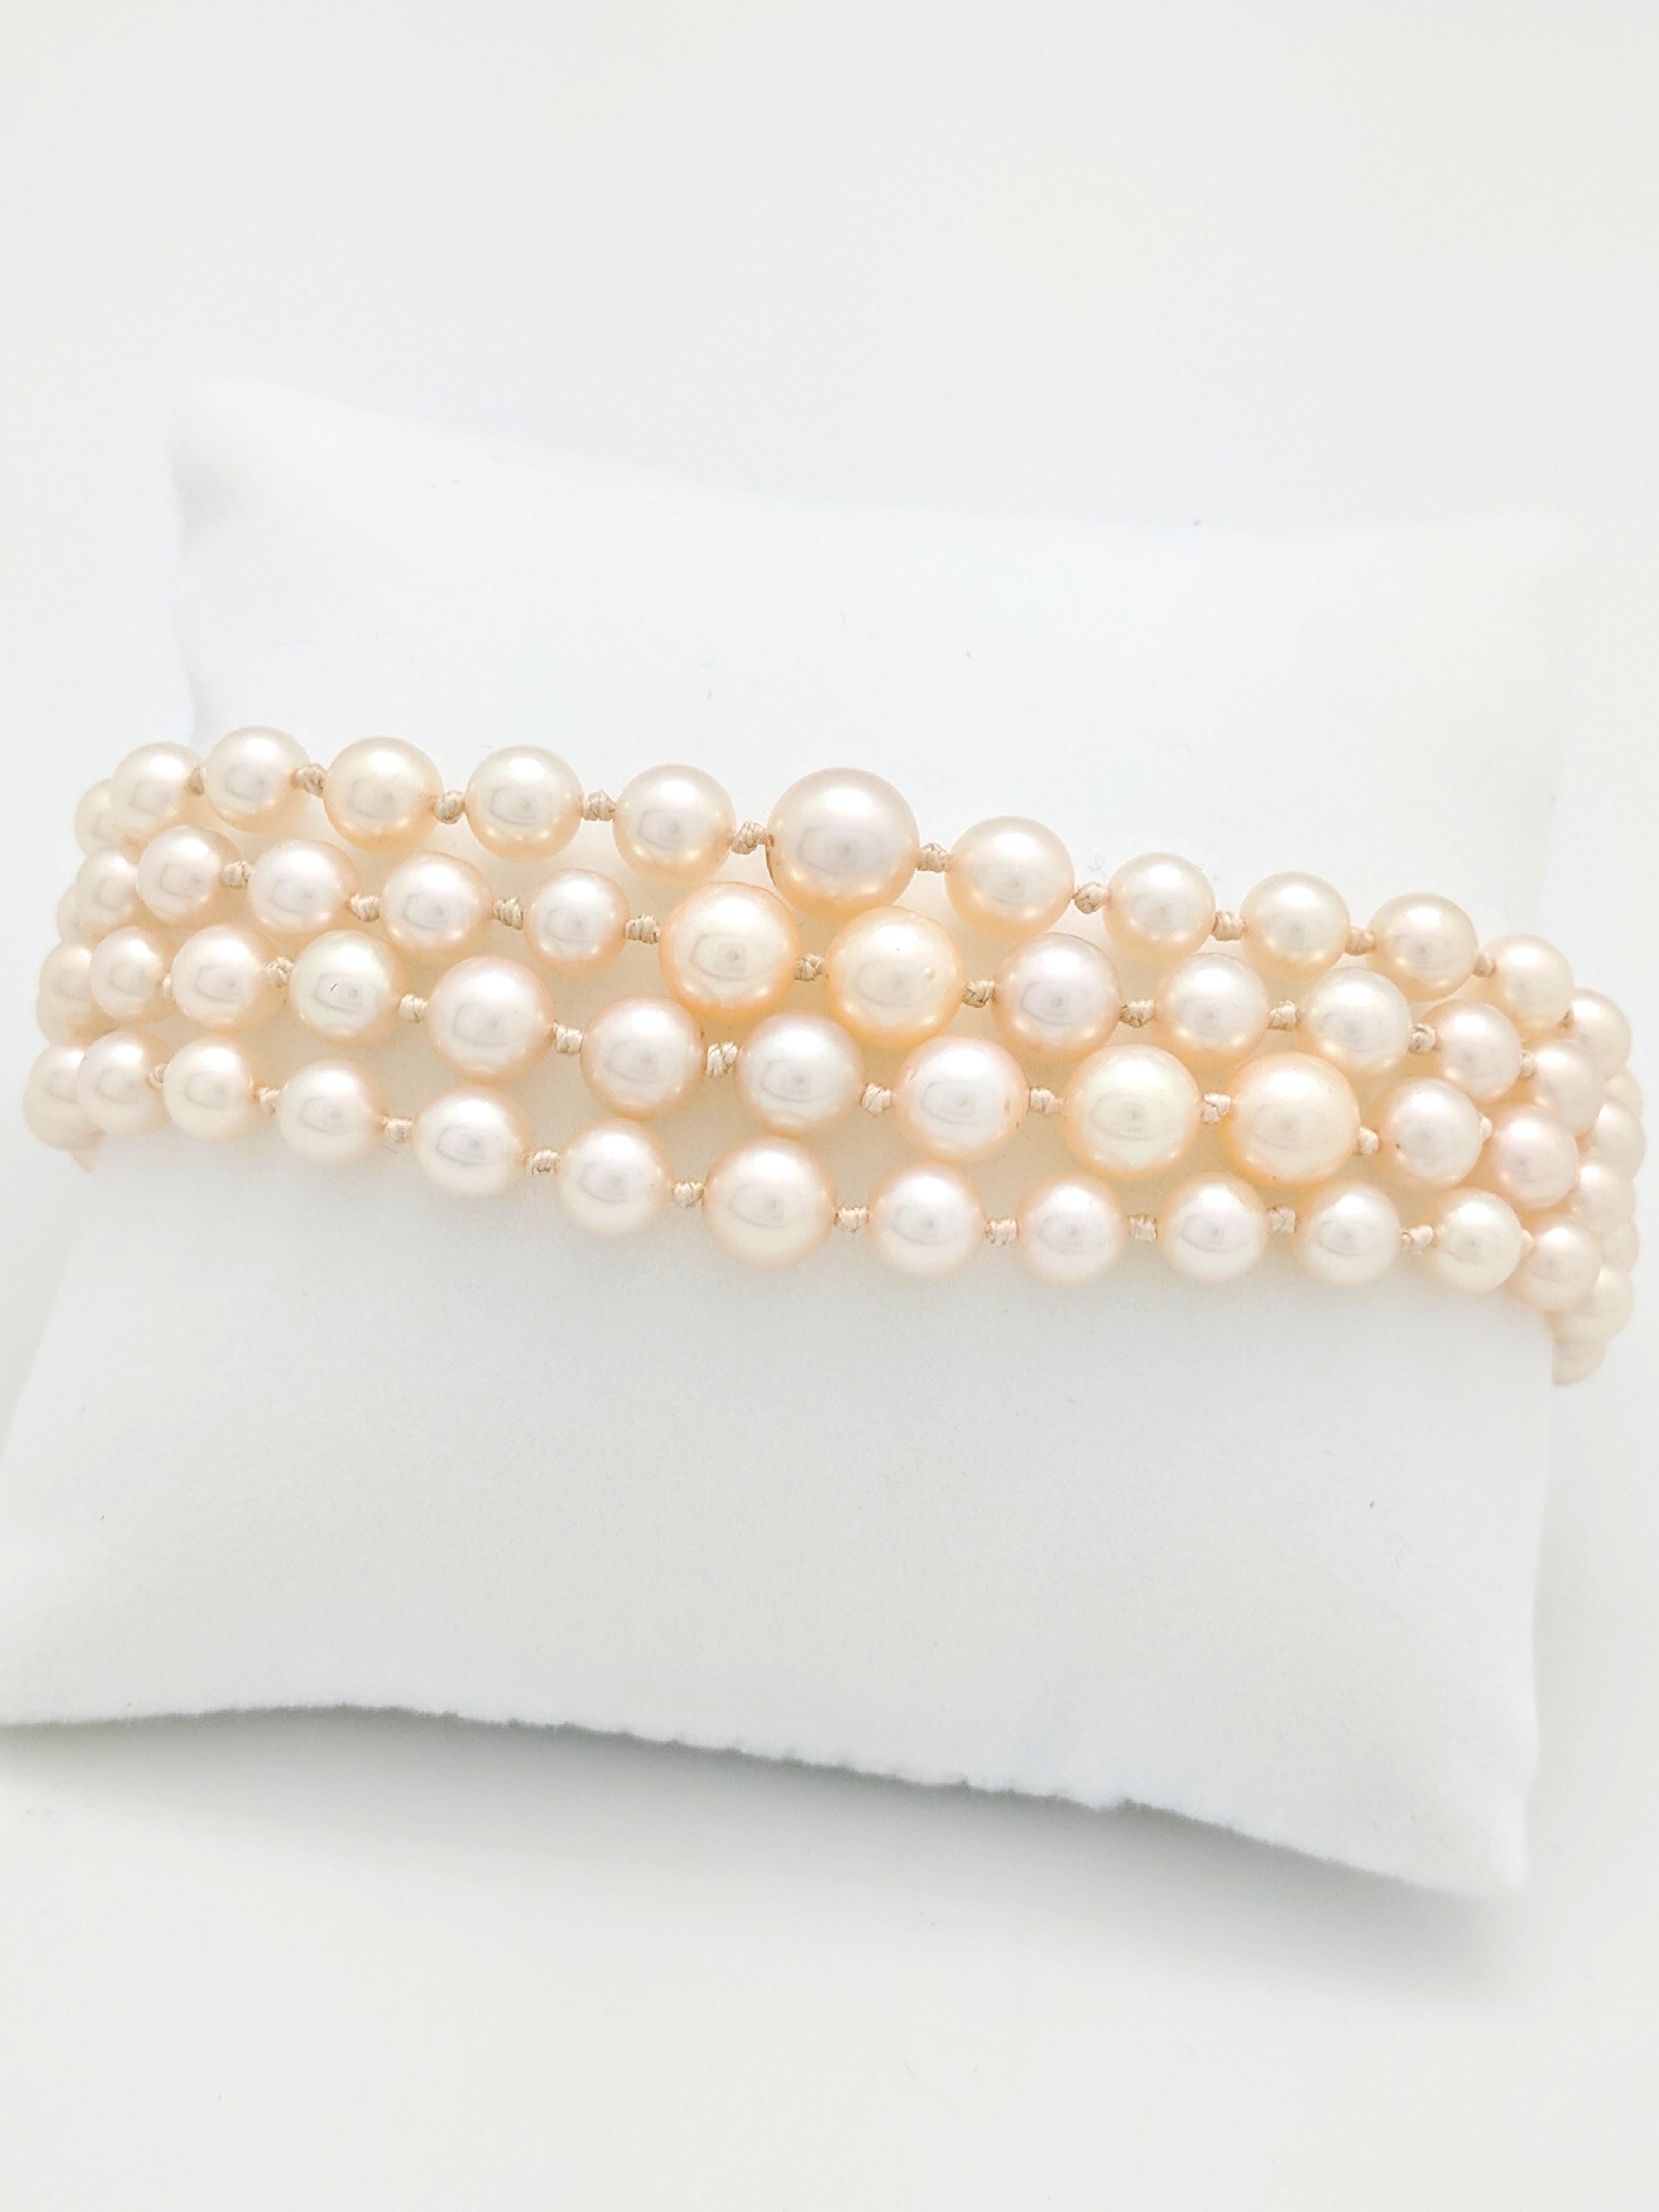 You are viewing a Beautiful Multi-Strand Pearl Bracelet that is sure to make a statement! The bracelet is crafted from 14k white gold, measures 1